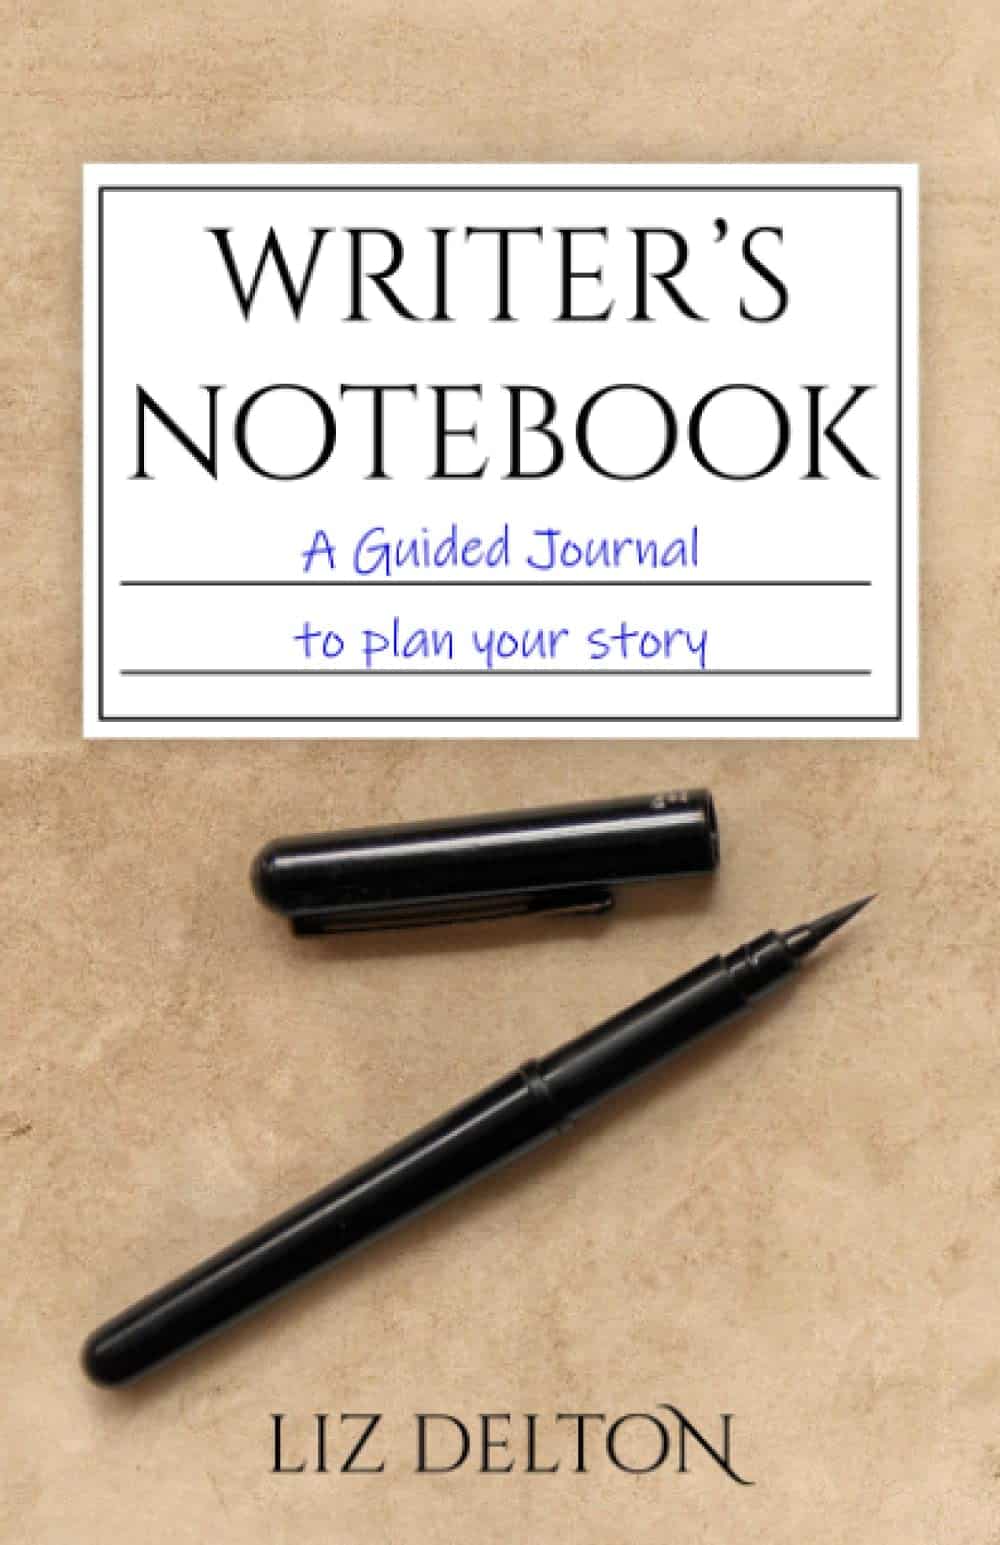 gifts for letter writers - writers notebook